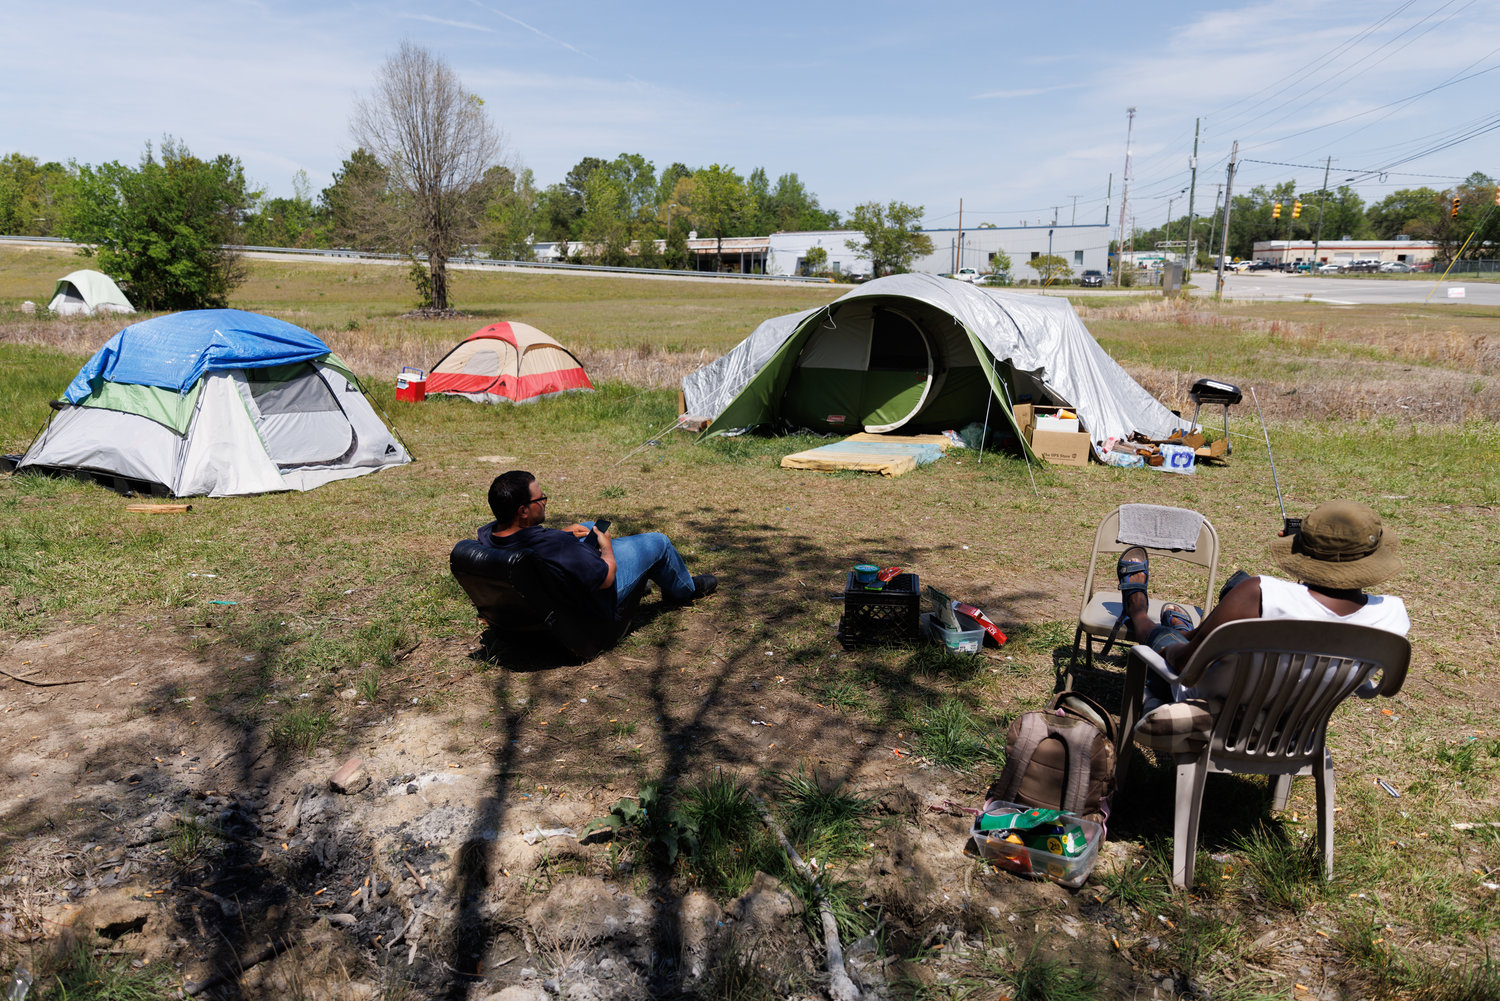 Two men share their stories at a homeless camp off Gillespie Street.